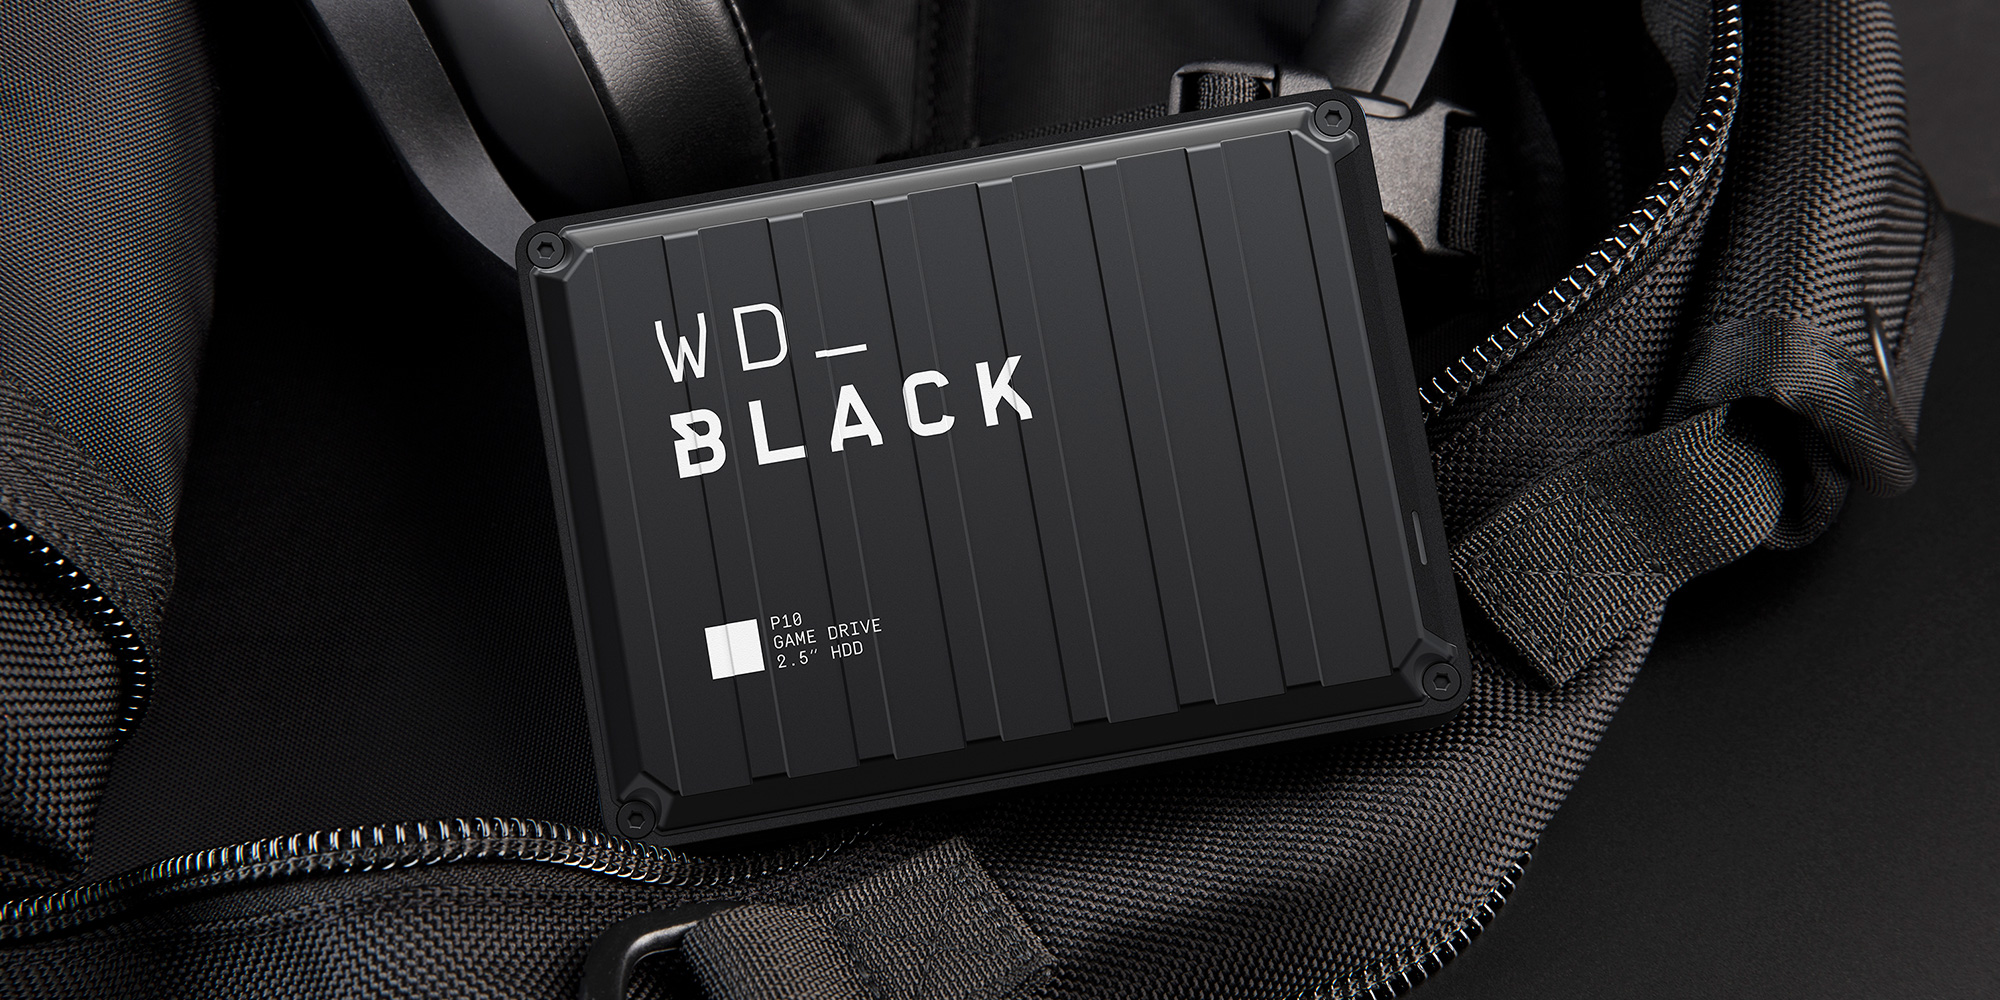 WD_Blk_P10_backpack